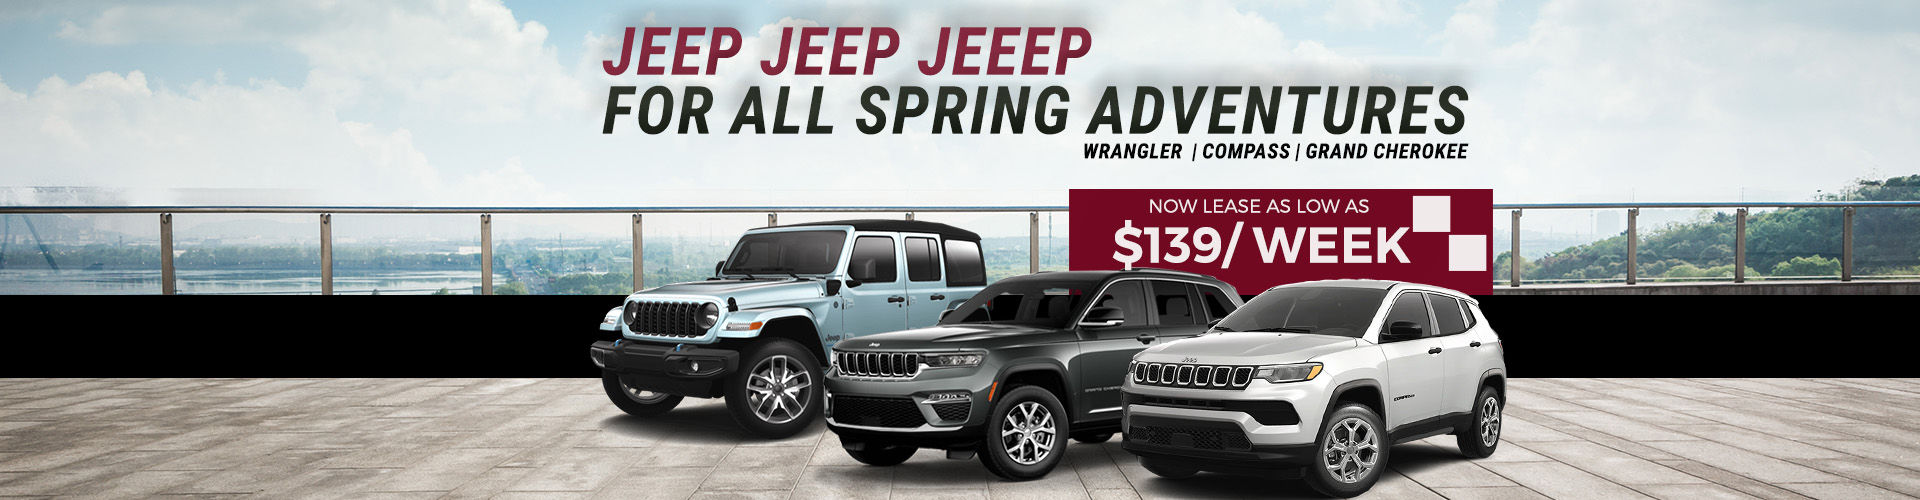 Jeep for all spring adventures